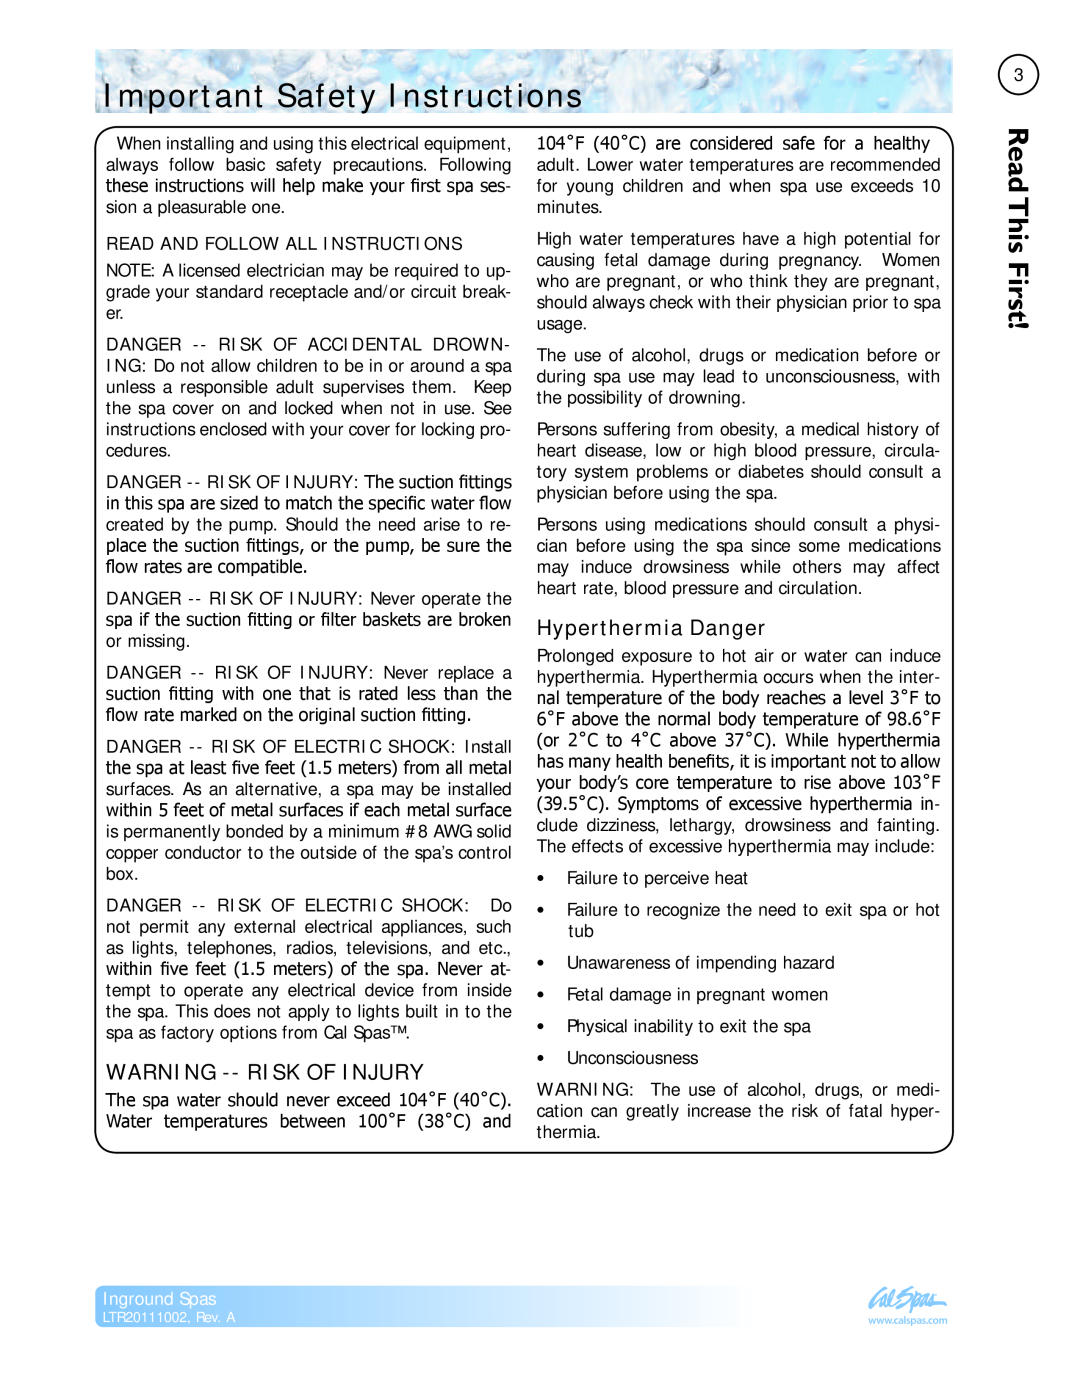 Cal Spas LTR20111002 manual Important Safety Instructions, Read This First, Warning --Risk Of Injury, Hyperthermia Danger 